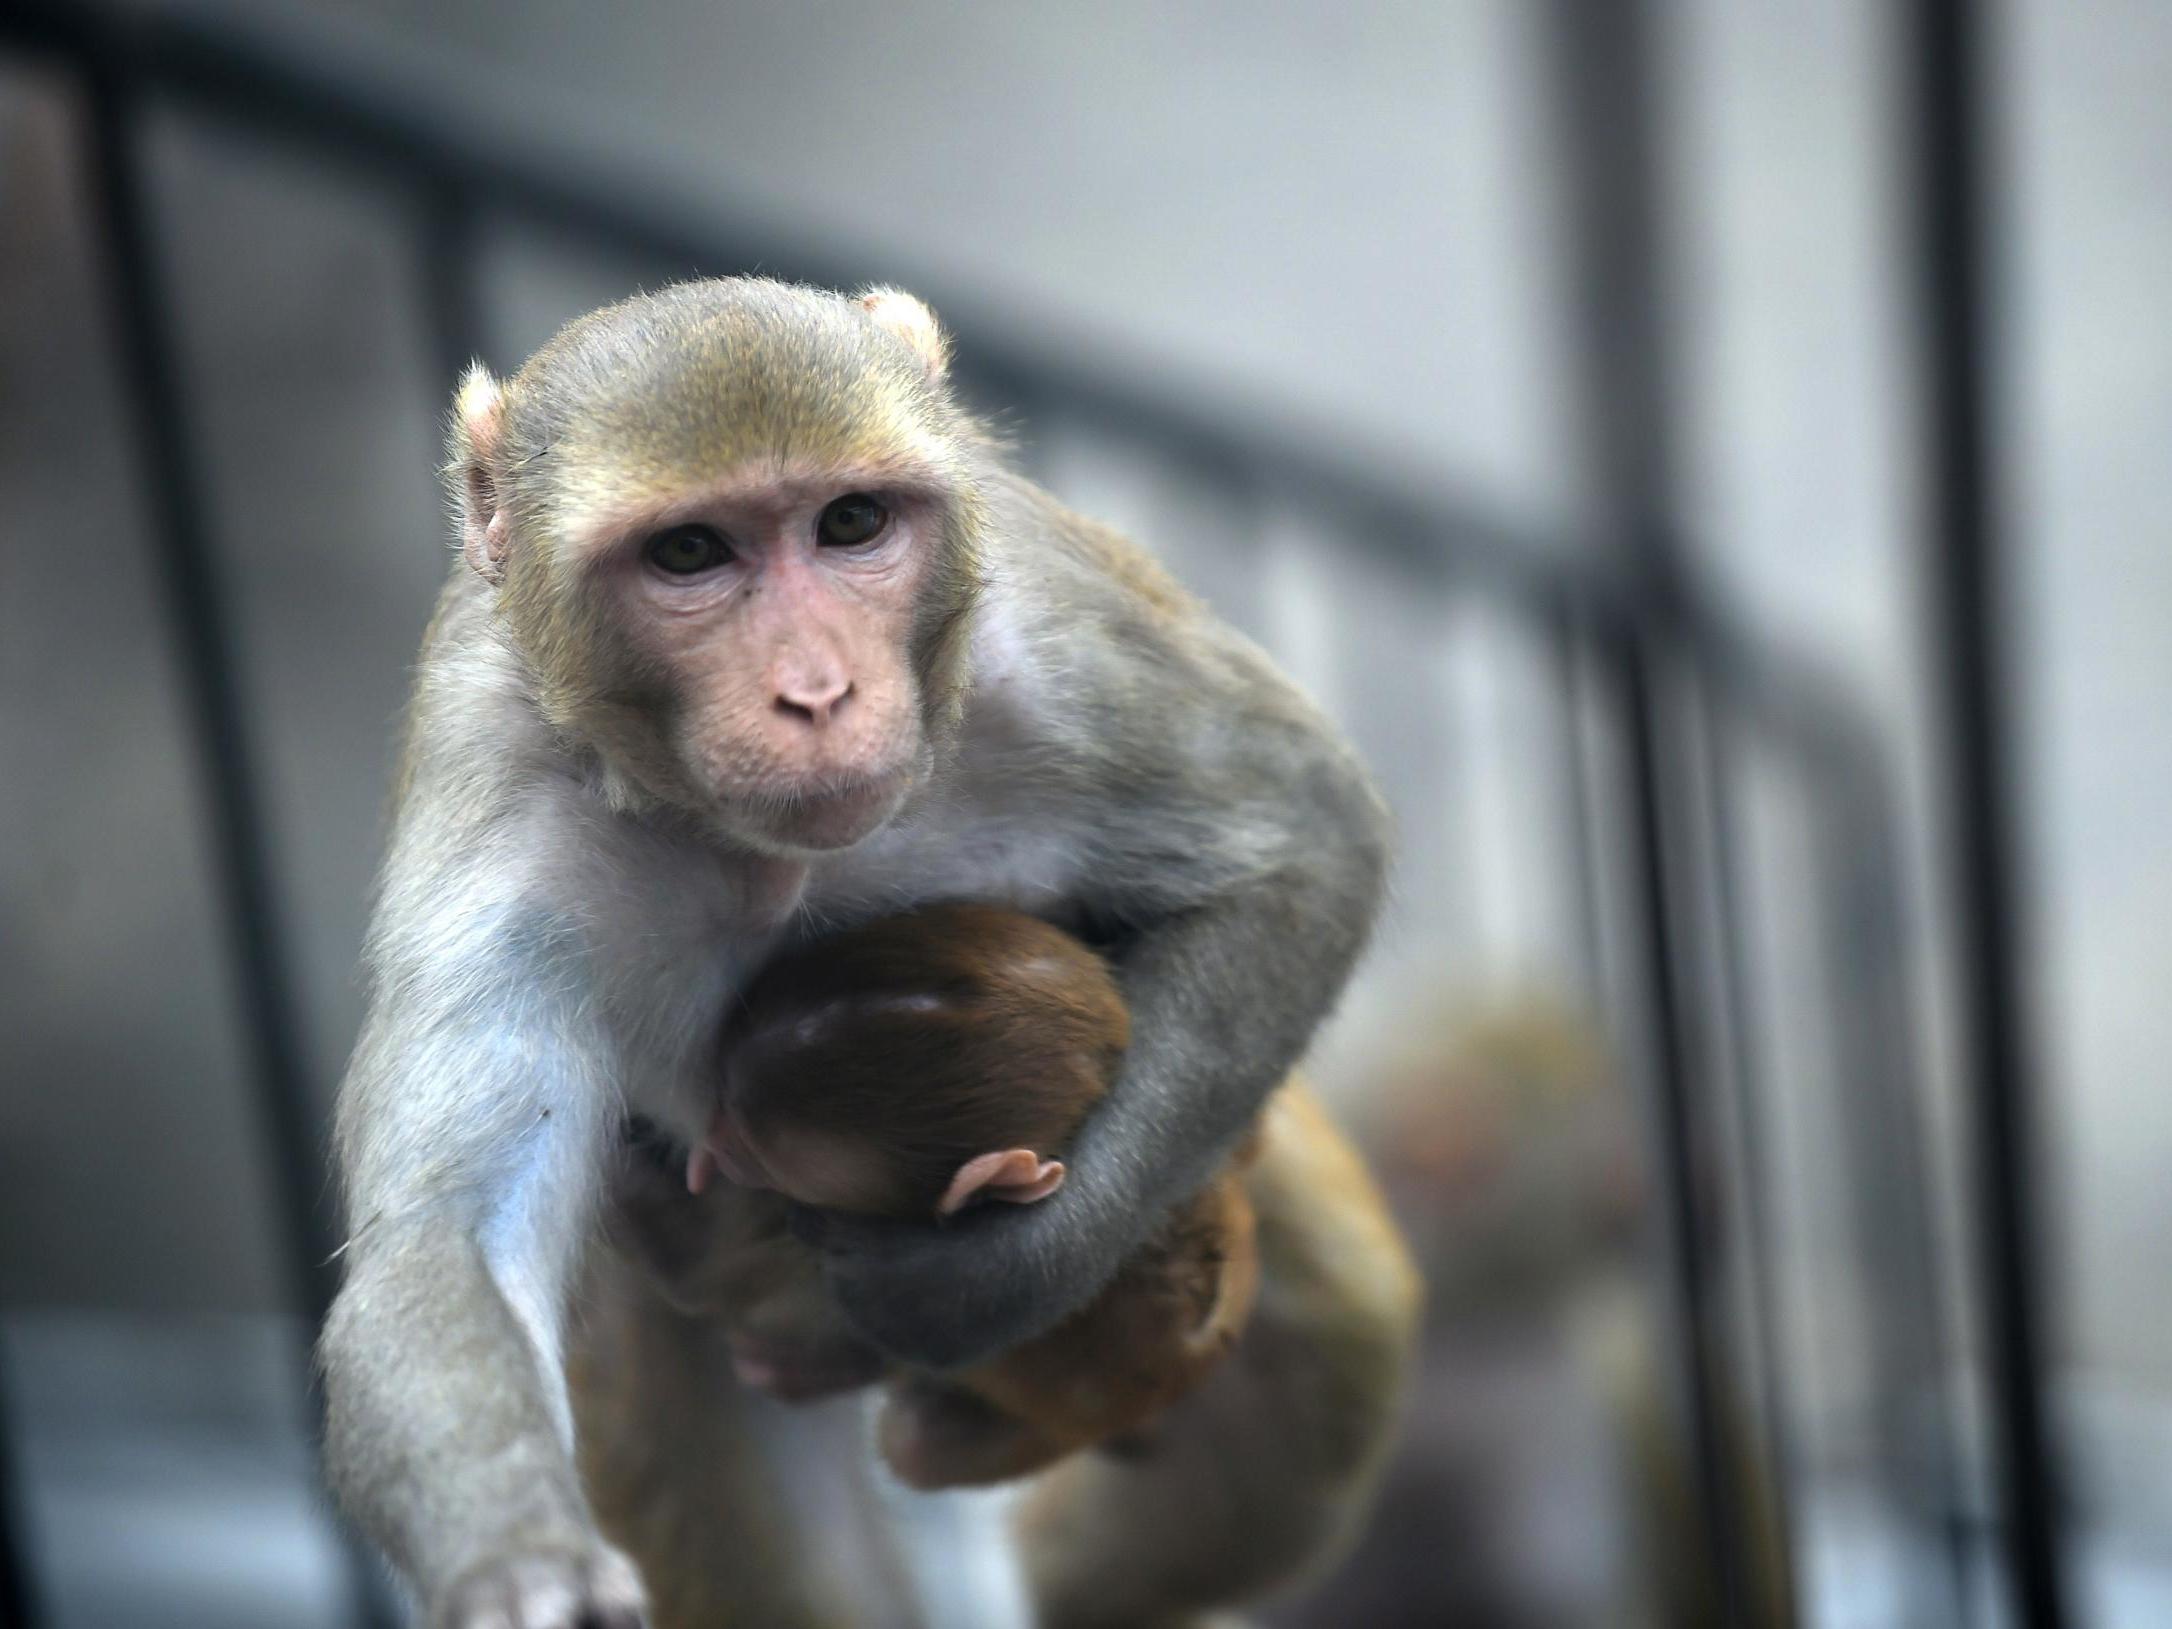 Monkeys Mating With Humans Sex - World's first human-monkey hybrid created in China ...